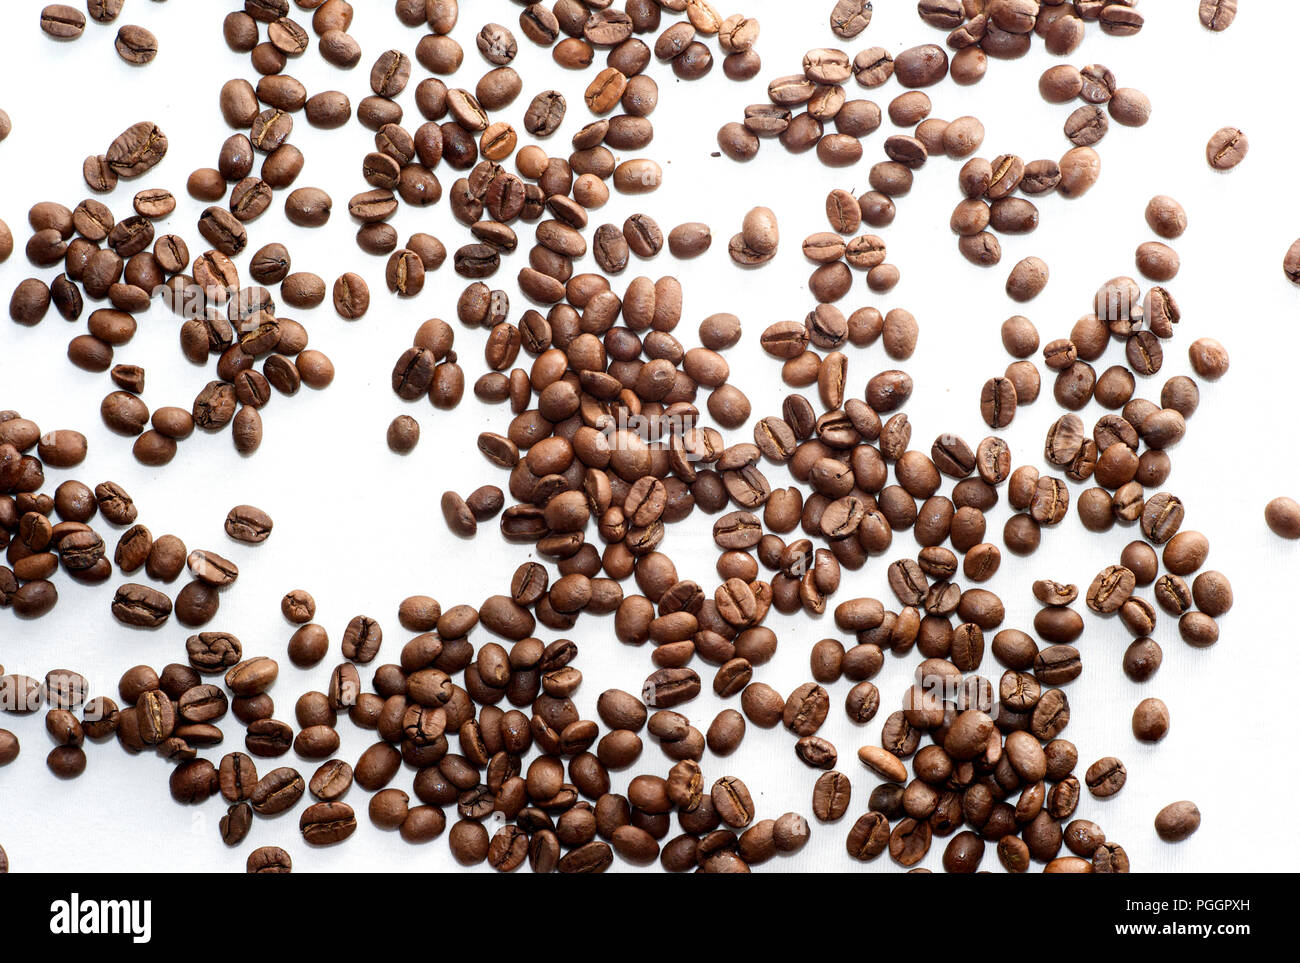 Scattered Brown Coffee Beans on White Background Stock Photo